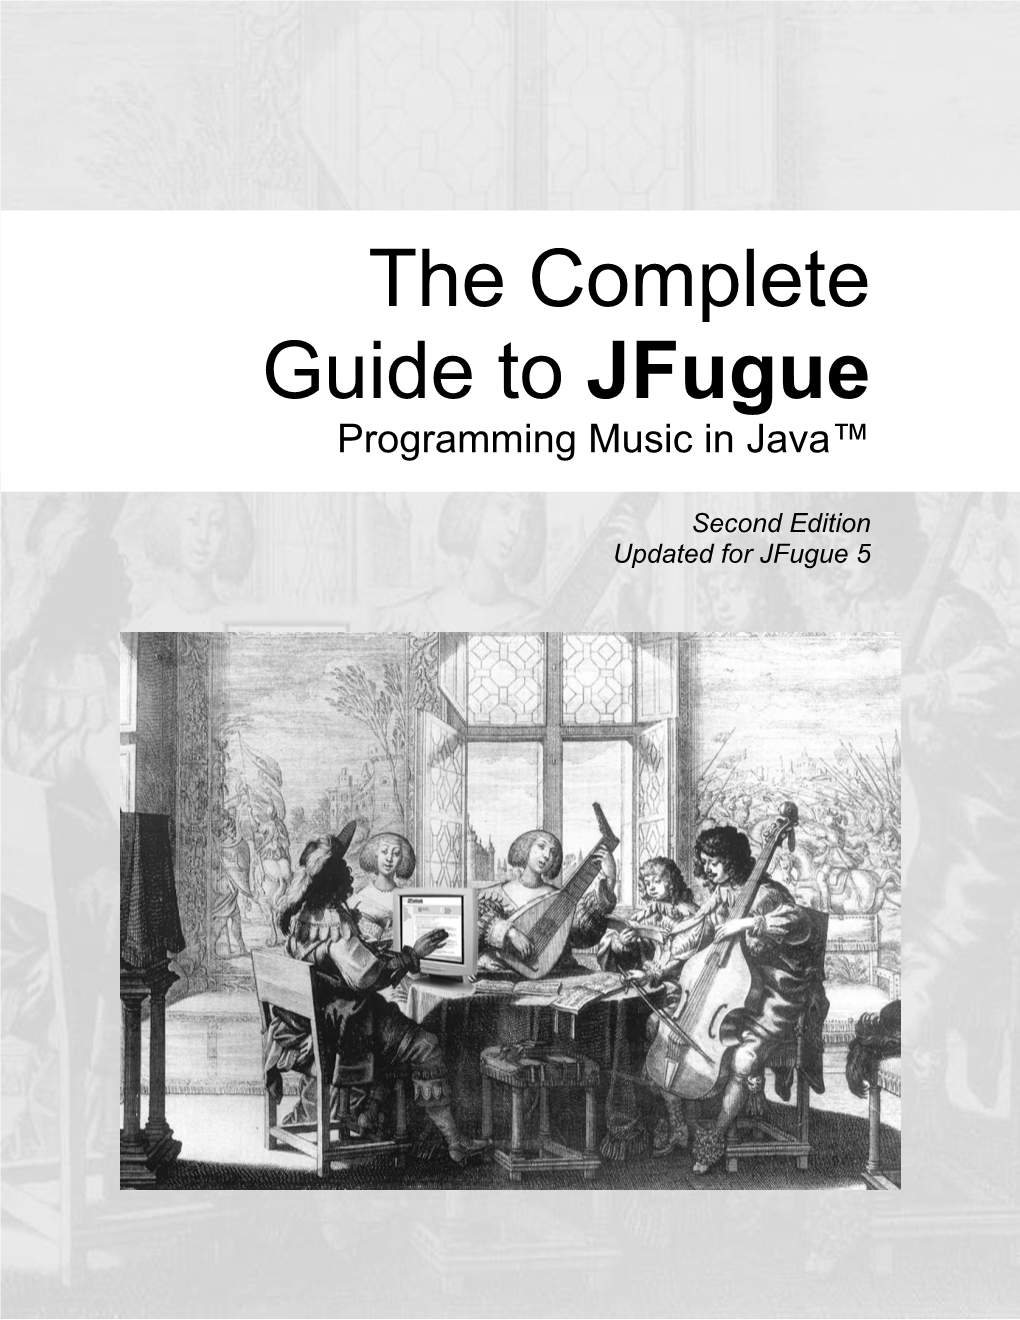 The Complete Guide to Jfugue, Second Edition